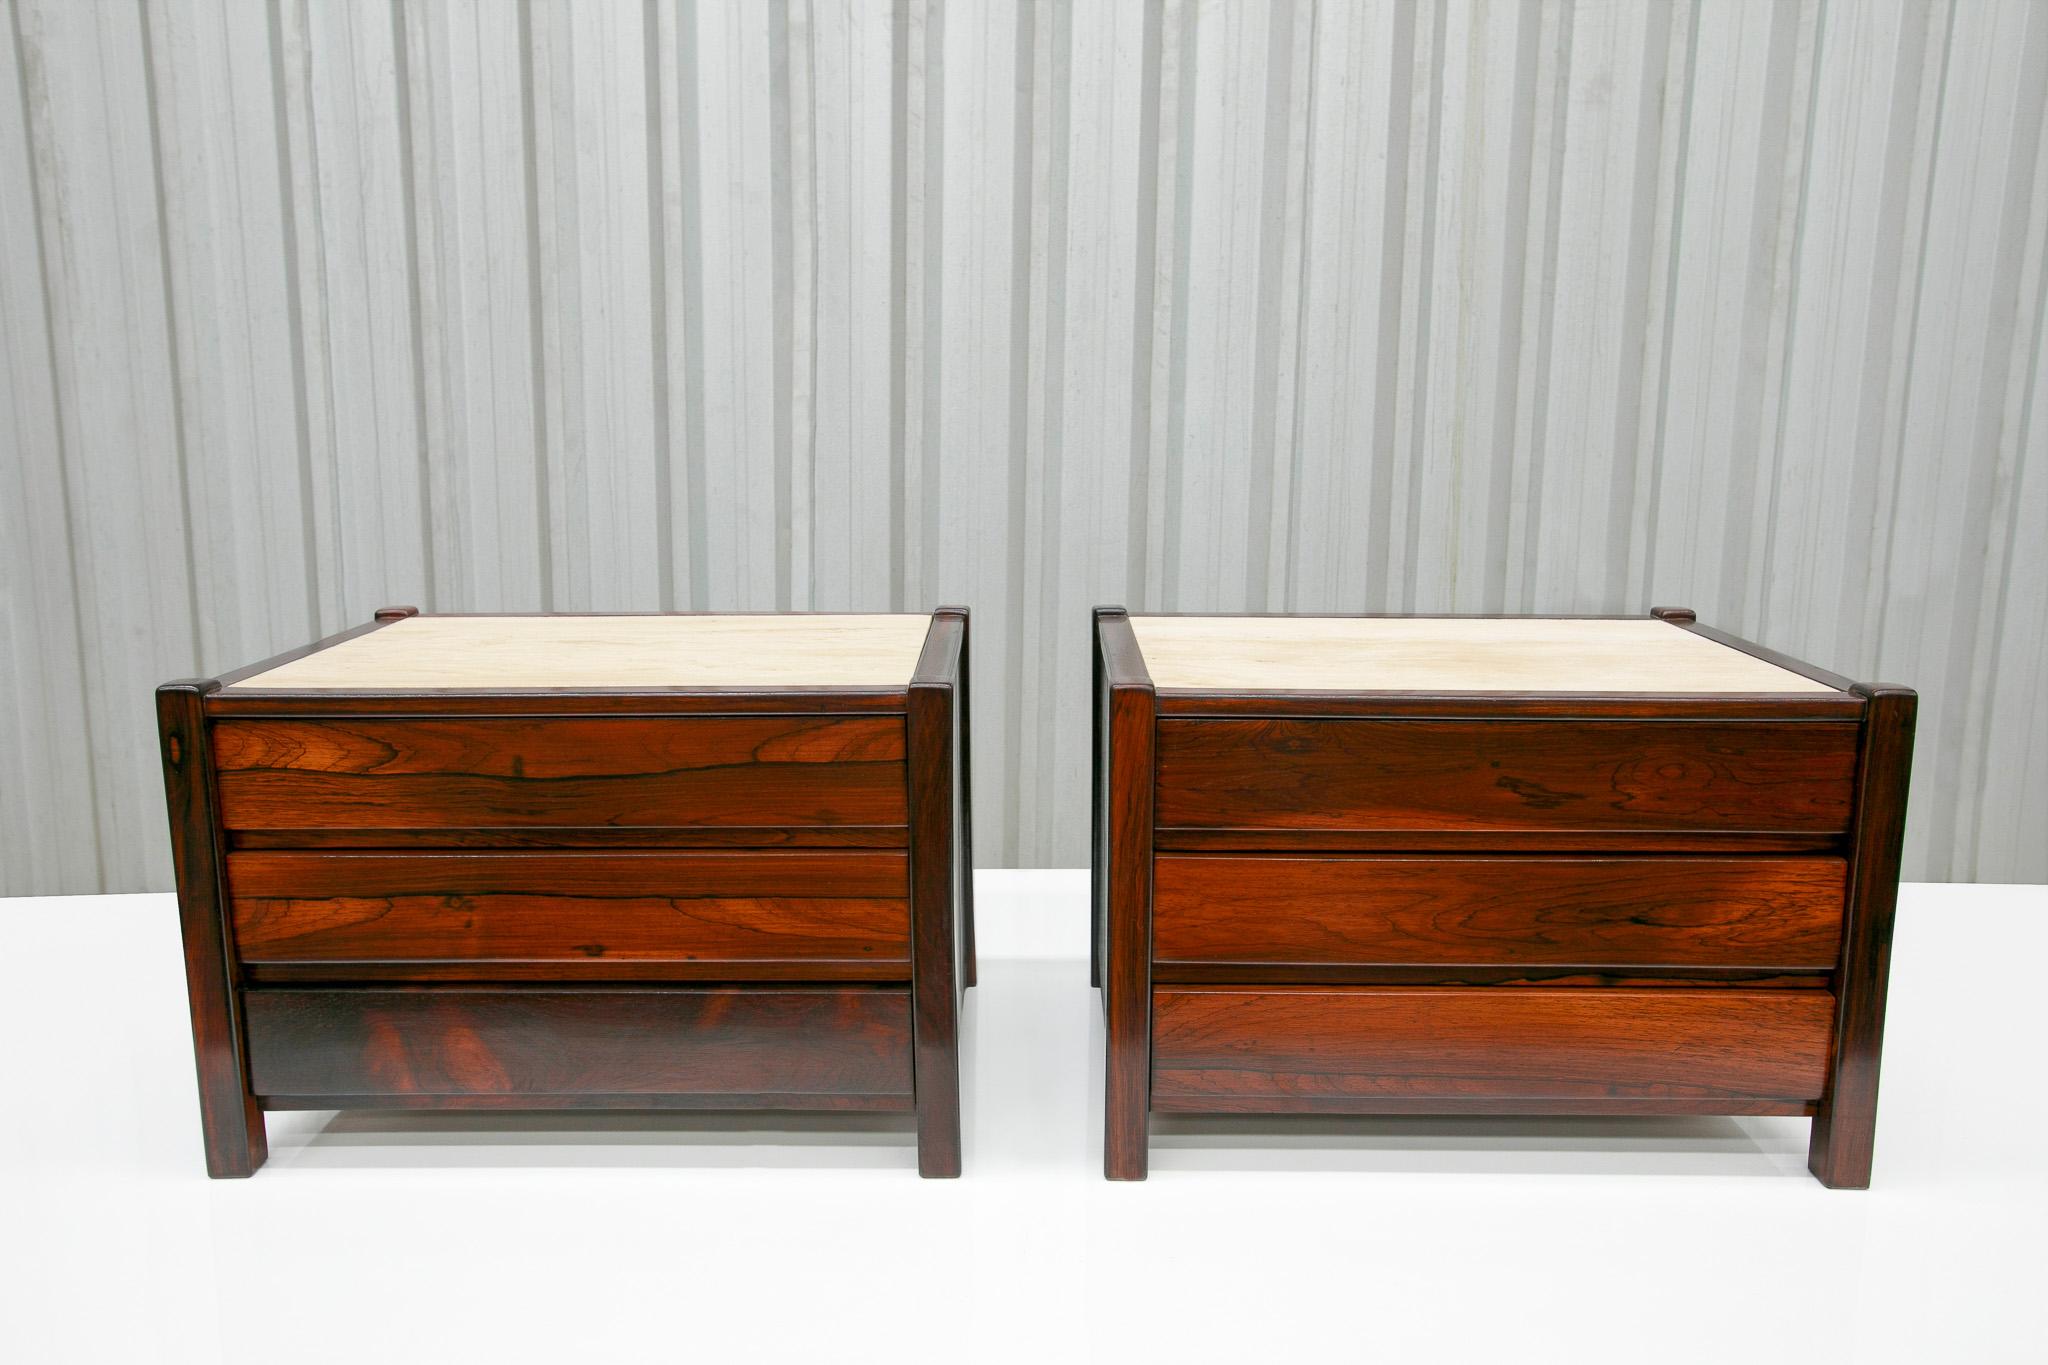 Available now, this Mid-Century Modern set of side tables in Travertine & Hardwood with drawers designed by Celina Decoracoes in the sixties are gorgeous! Each table is made with Brazilian rosewood with four legs, three drawers, and a travertine top